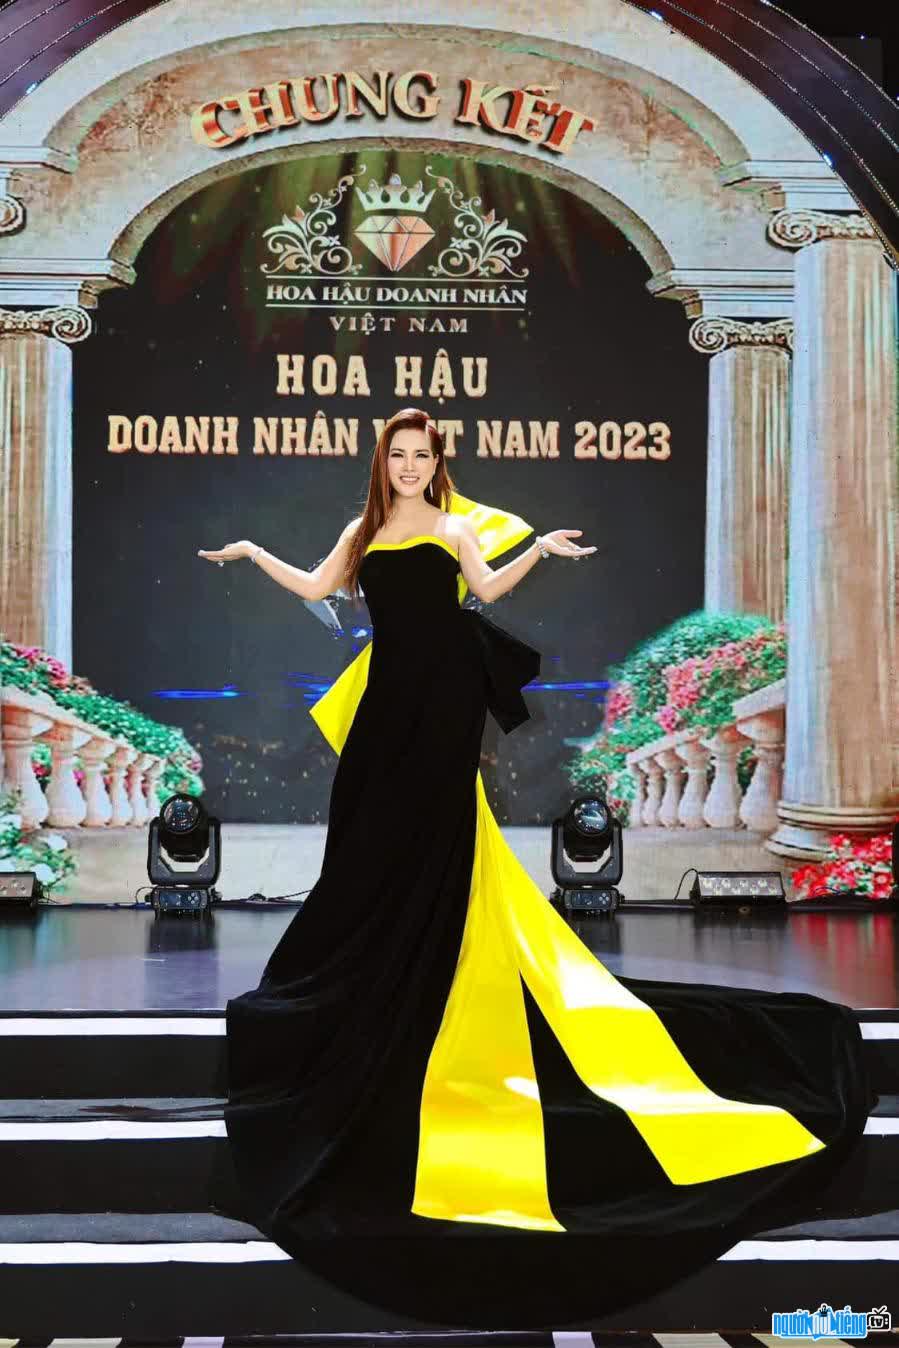 Designer Than Hoang Bich Thuy accompanies the Miss Entrepreneur contest